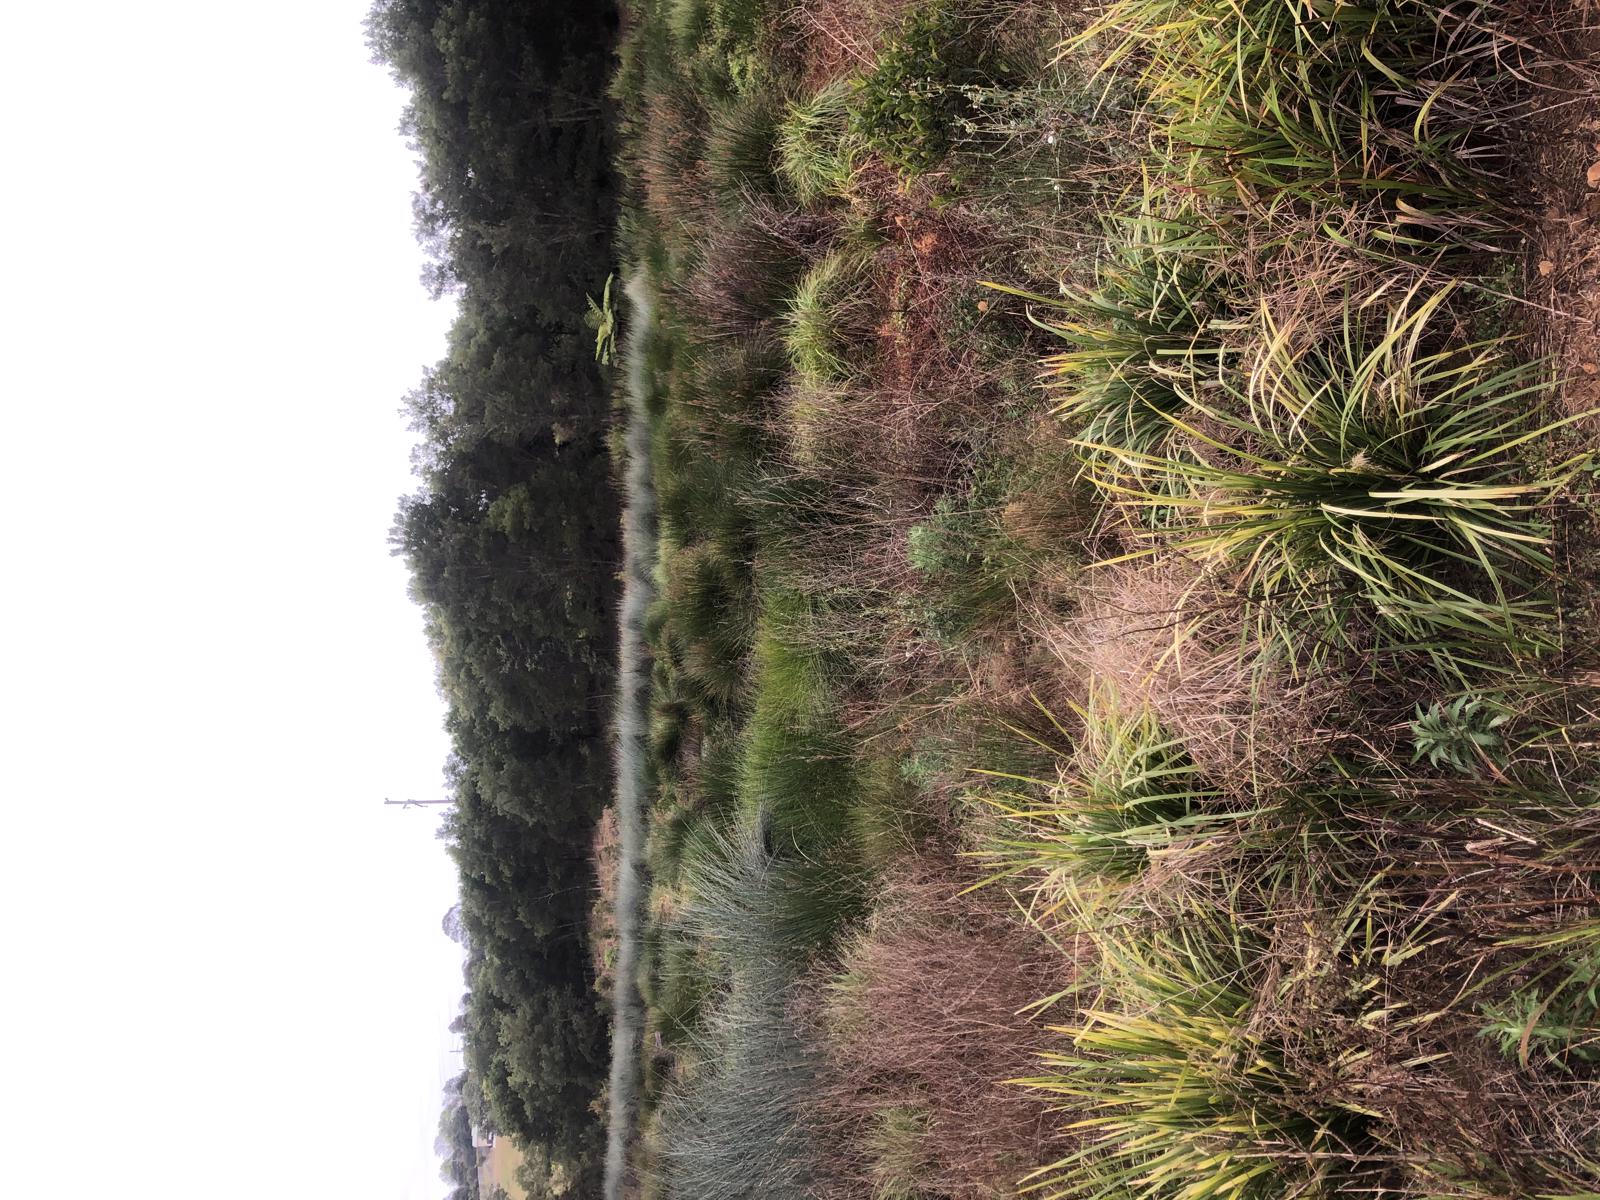 Trail Image for Maleny Northern Wetlands Trail